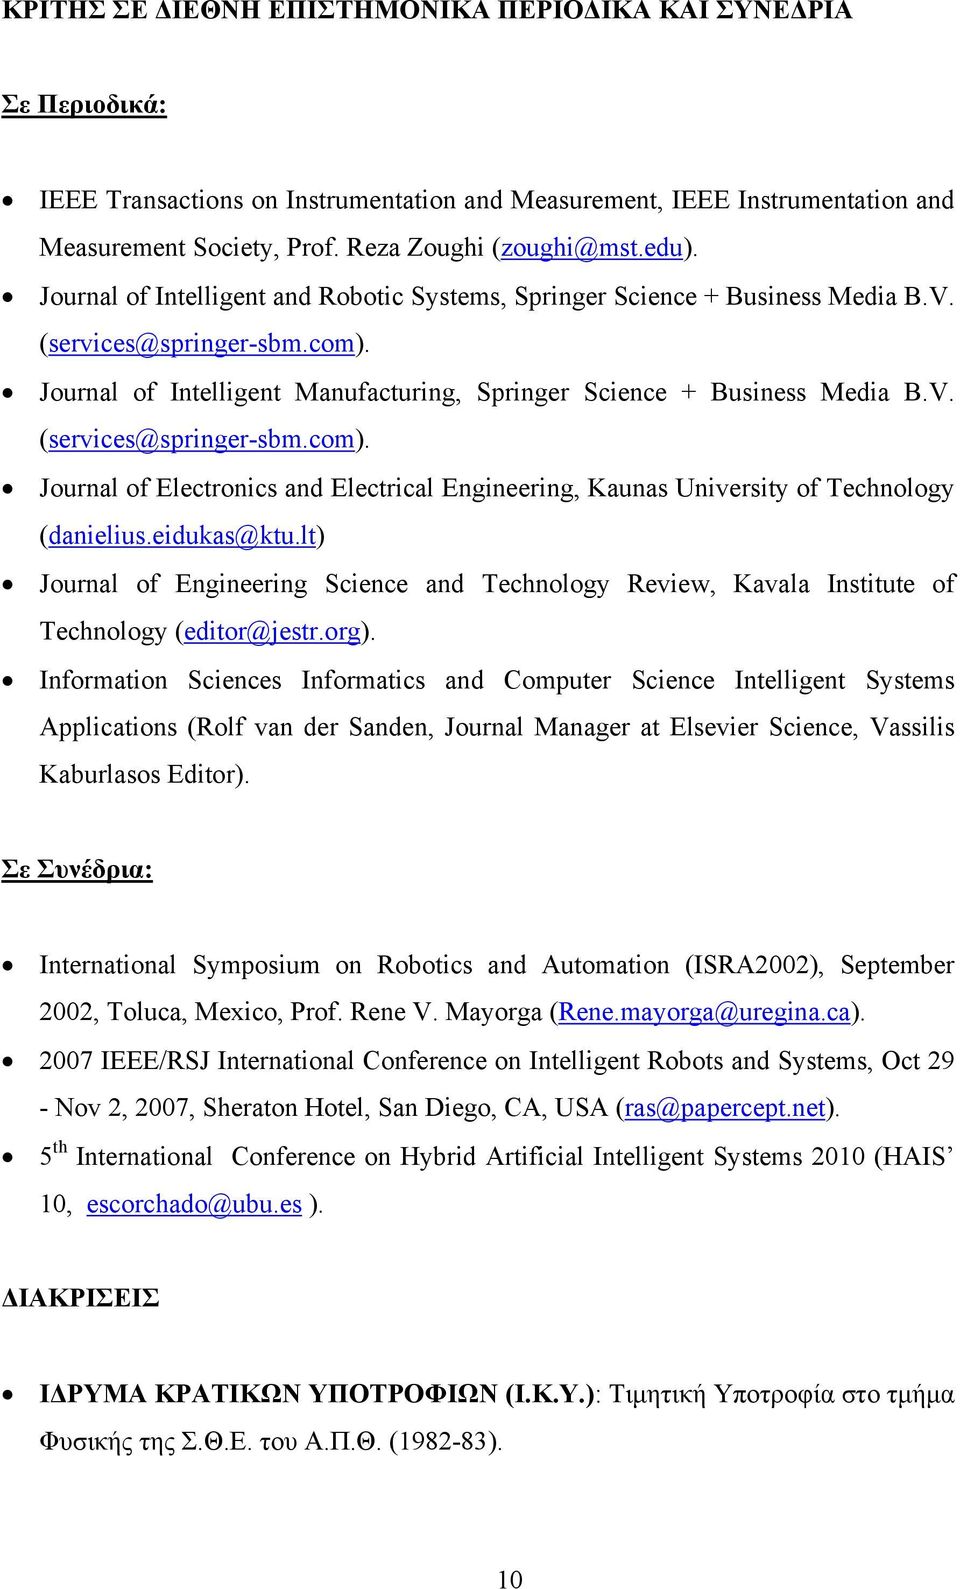 Journal of Intelligent Manufacturing, Springer Science + Business Media B.V. (services@springer-sbm.com). Journal of Electronics and Electrical Engineering, Kaunas University of Technology (danielius.